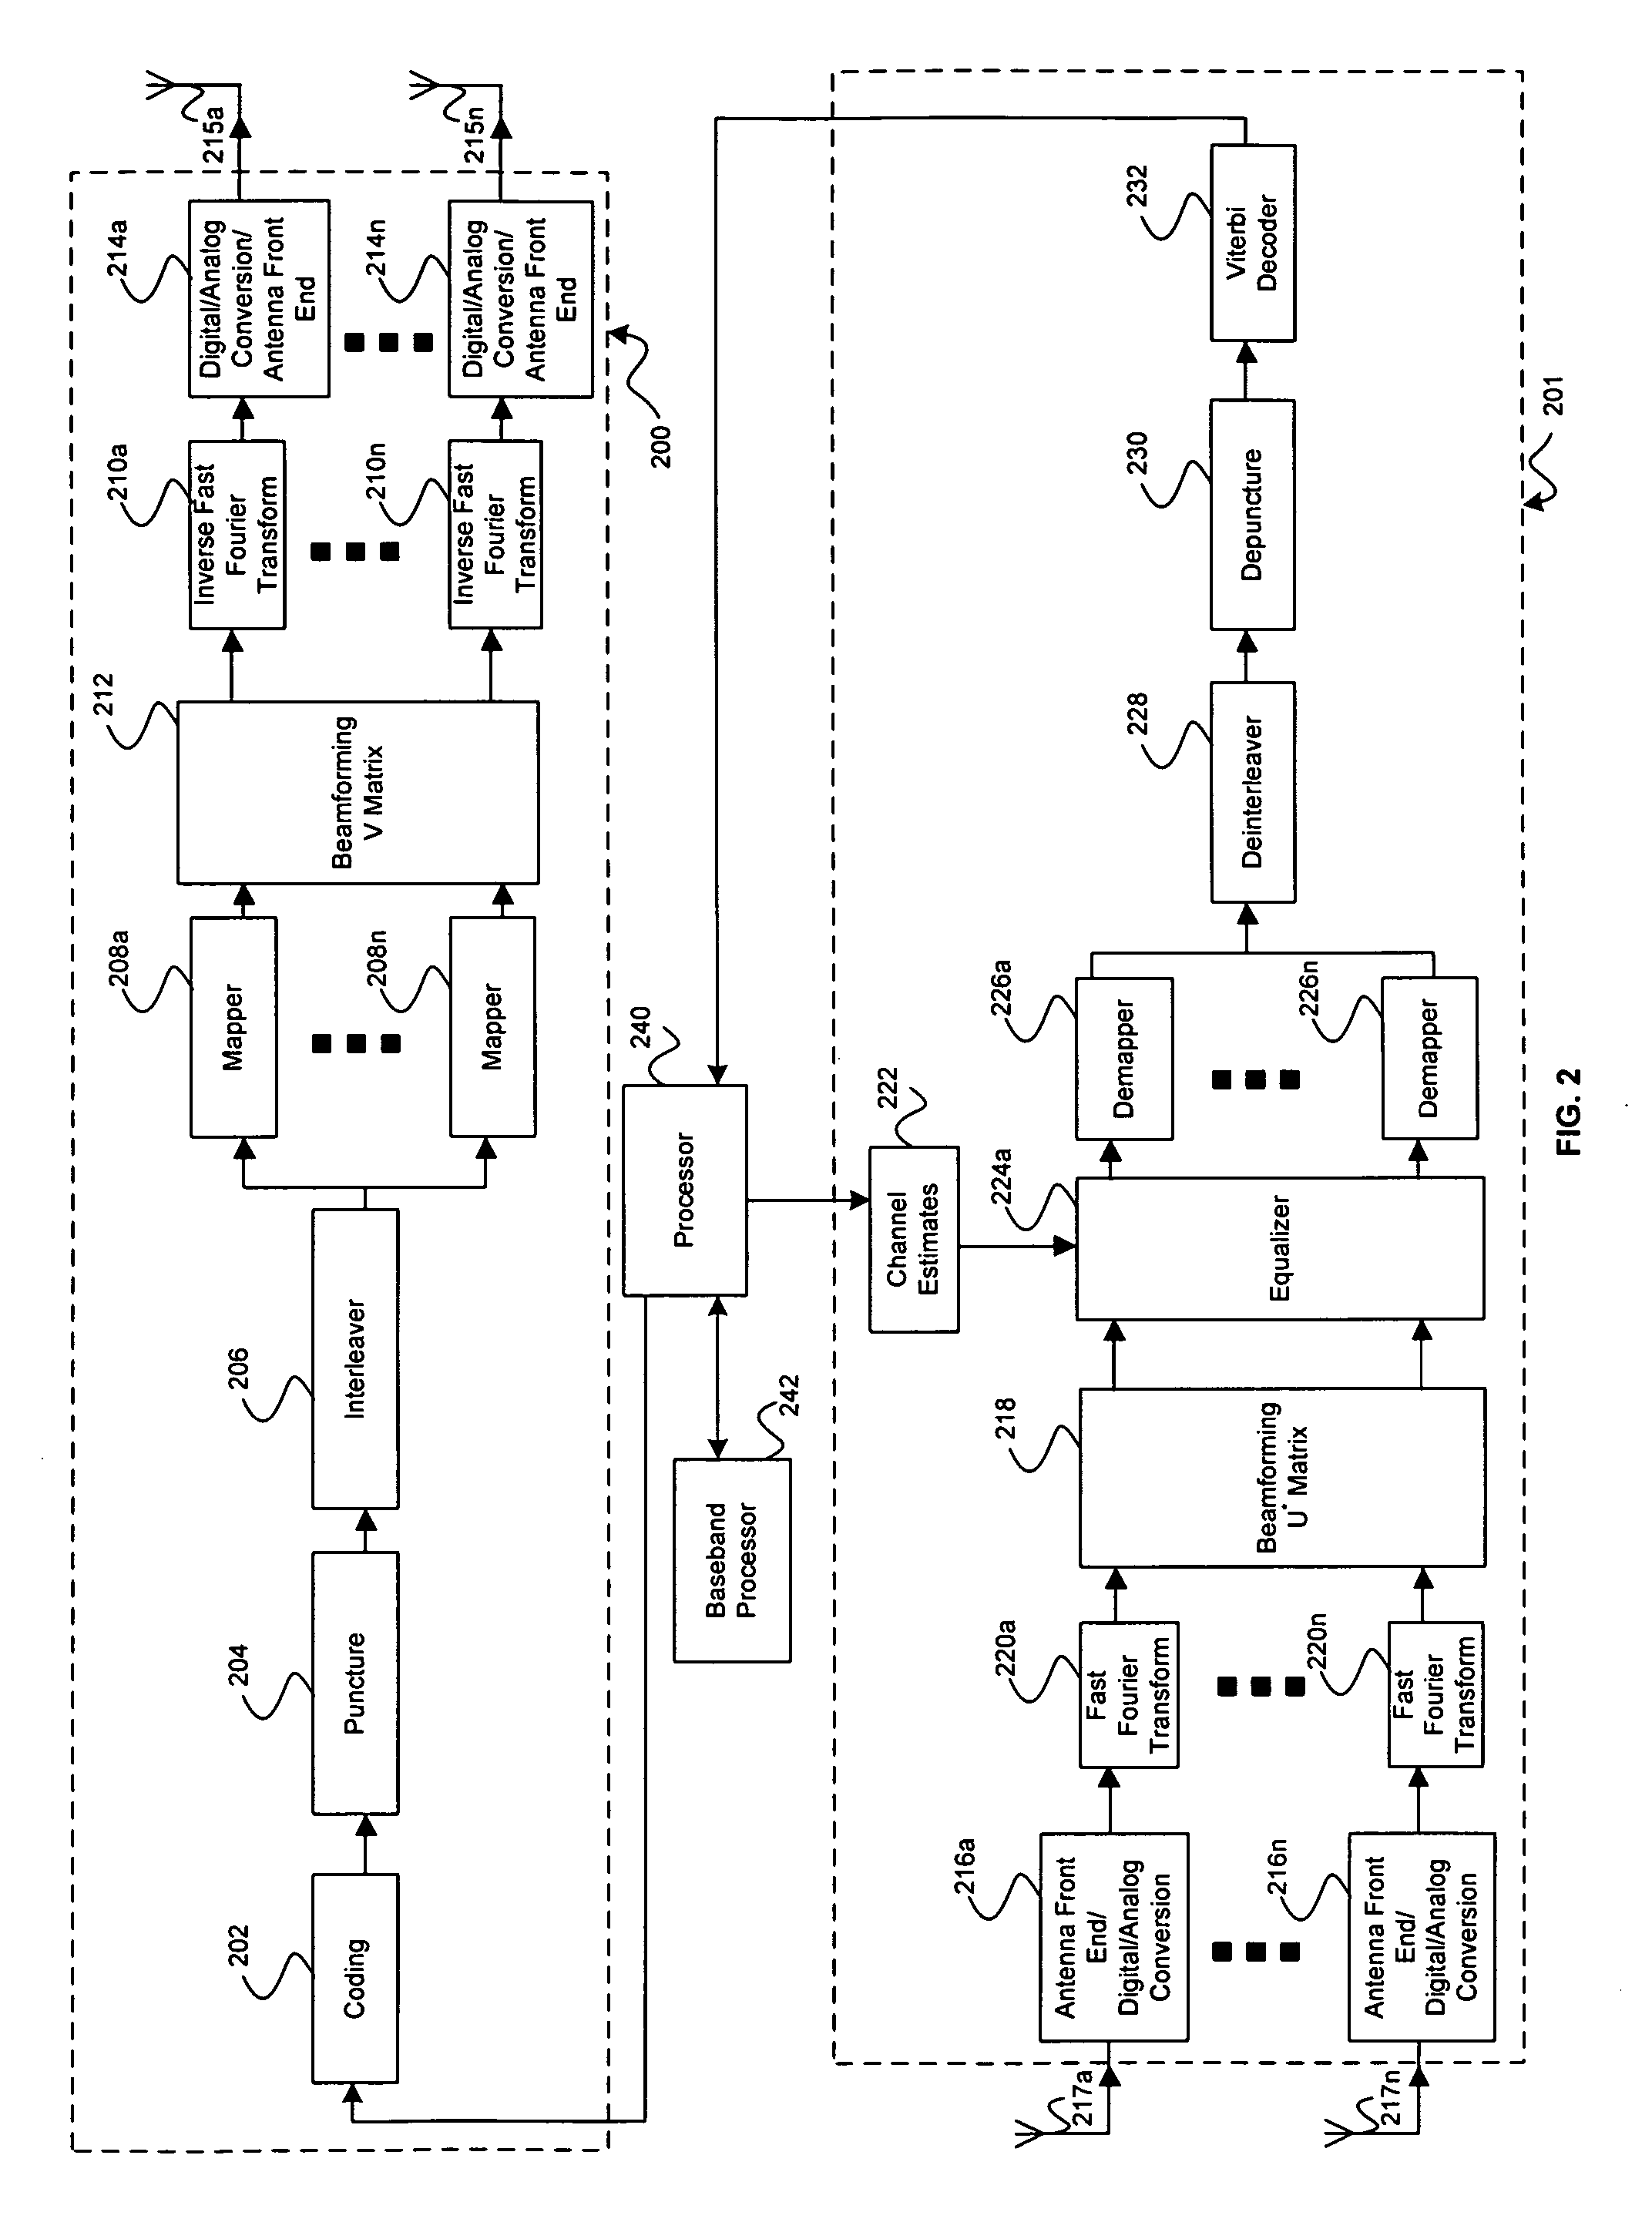 Method and system for parsing bits in an interleaver for adaptive modulations in a multiple input multiple output (MIMO) wireless local area network (WLAN) system